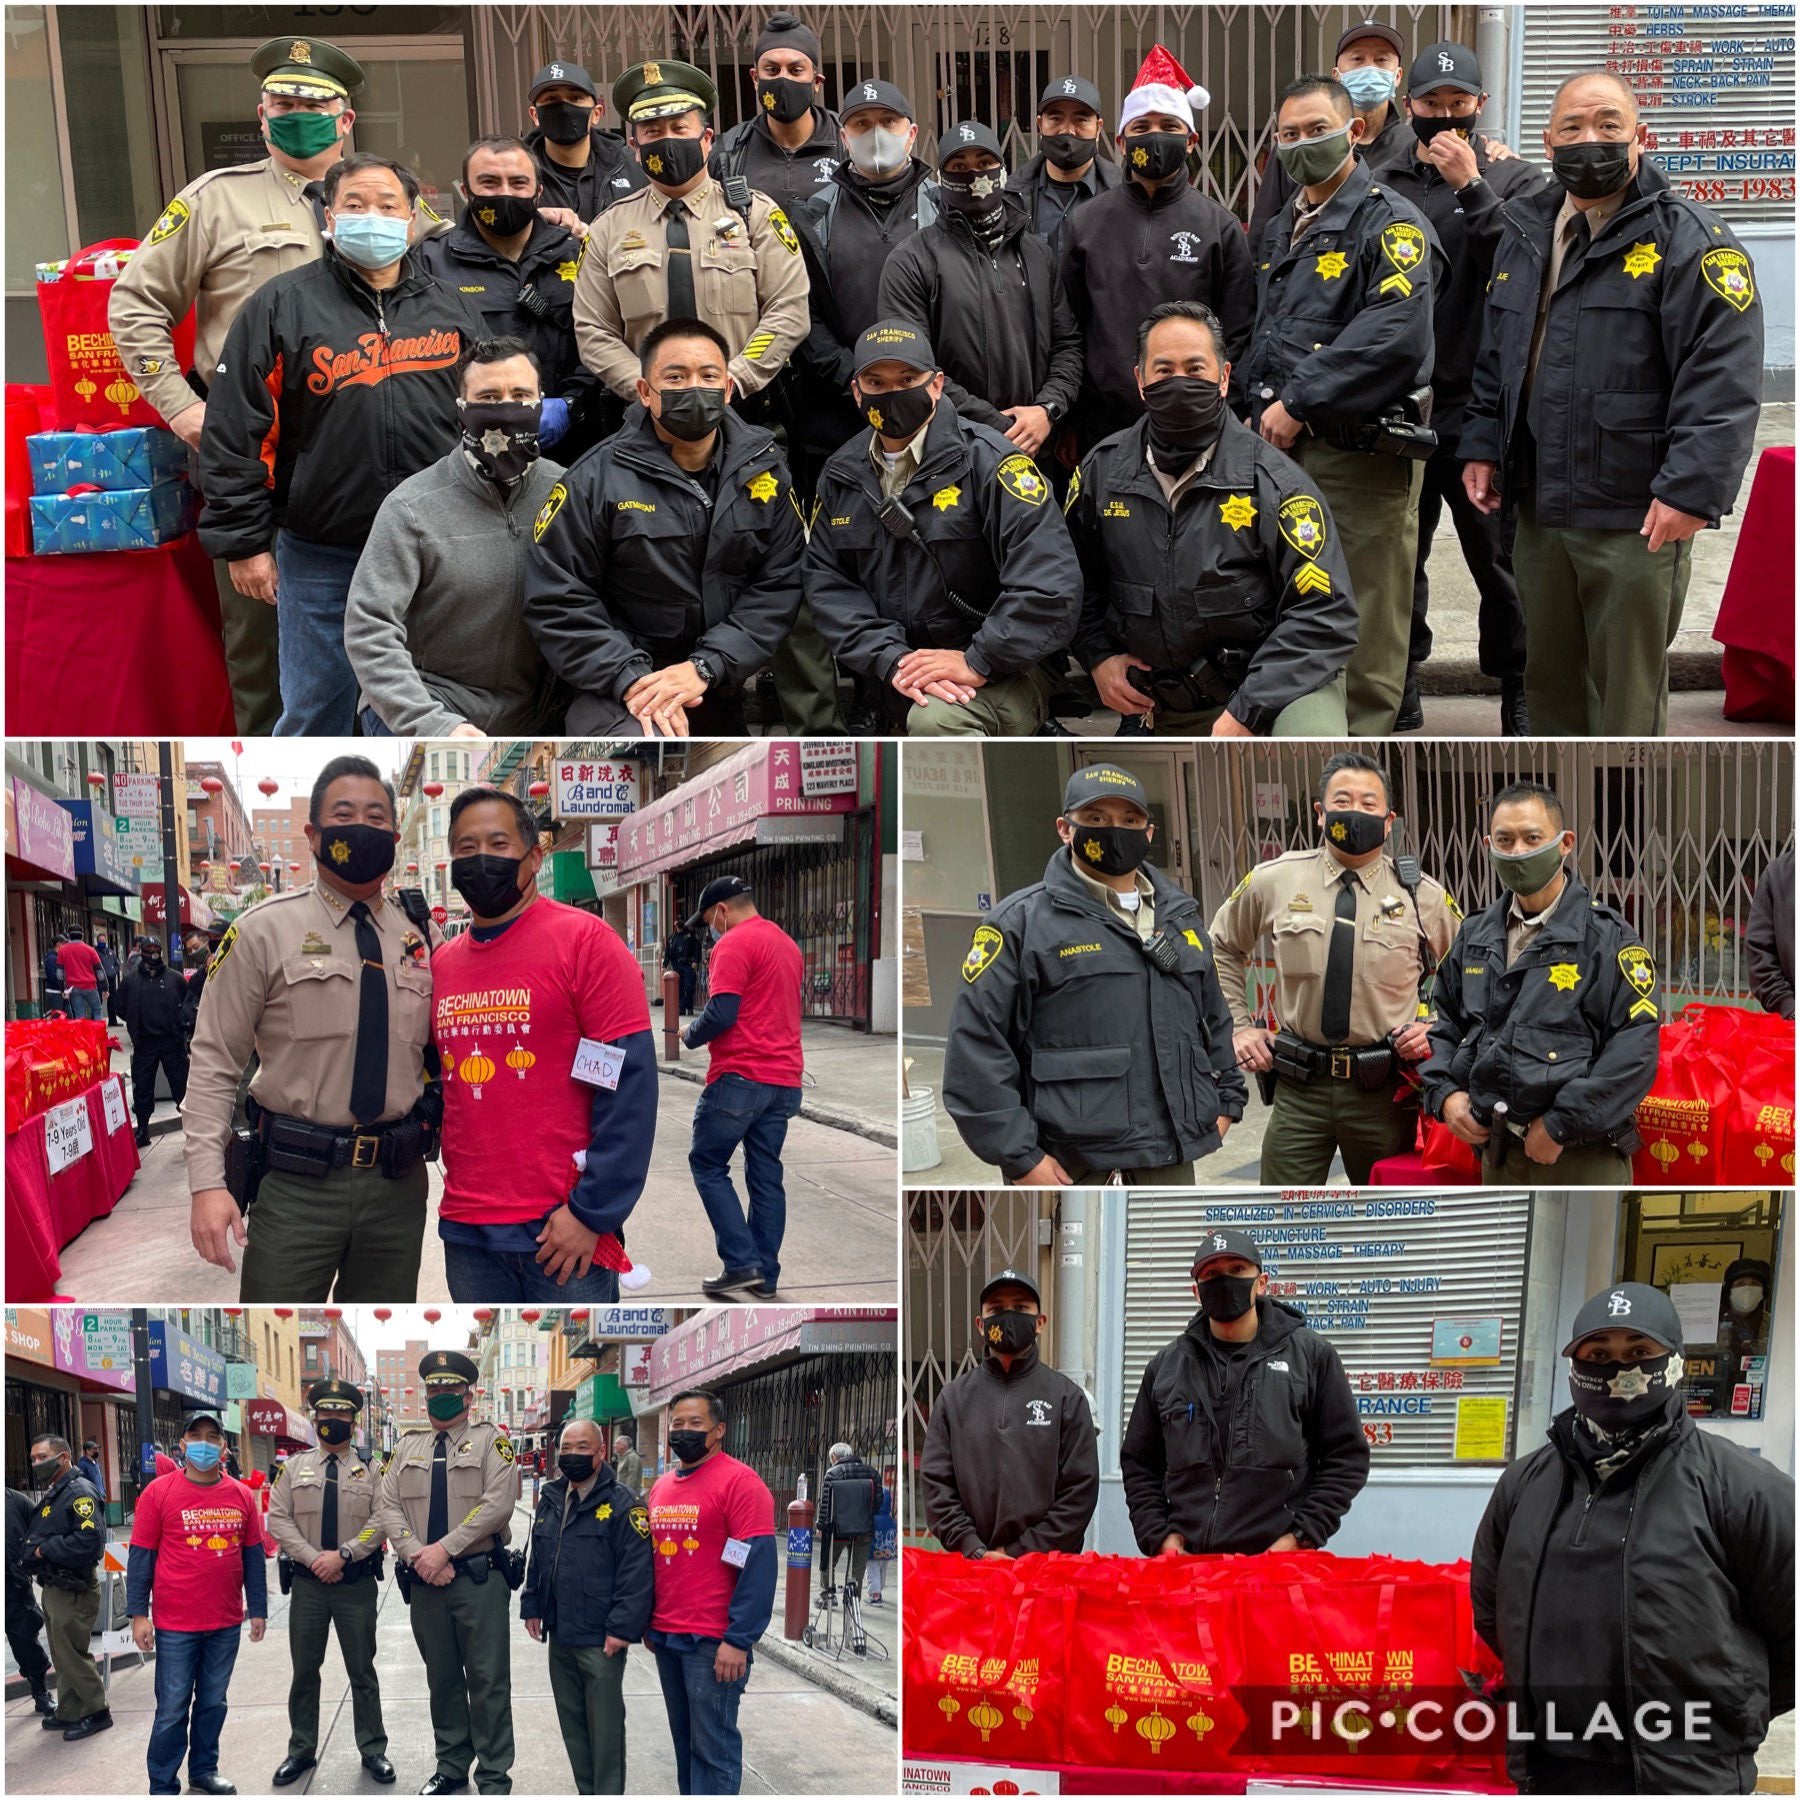 Be Chinatown toy giveaway